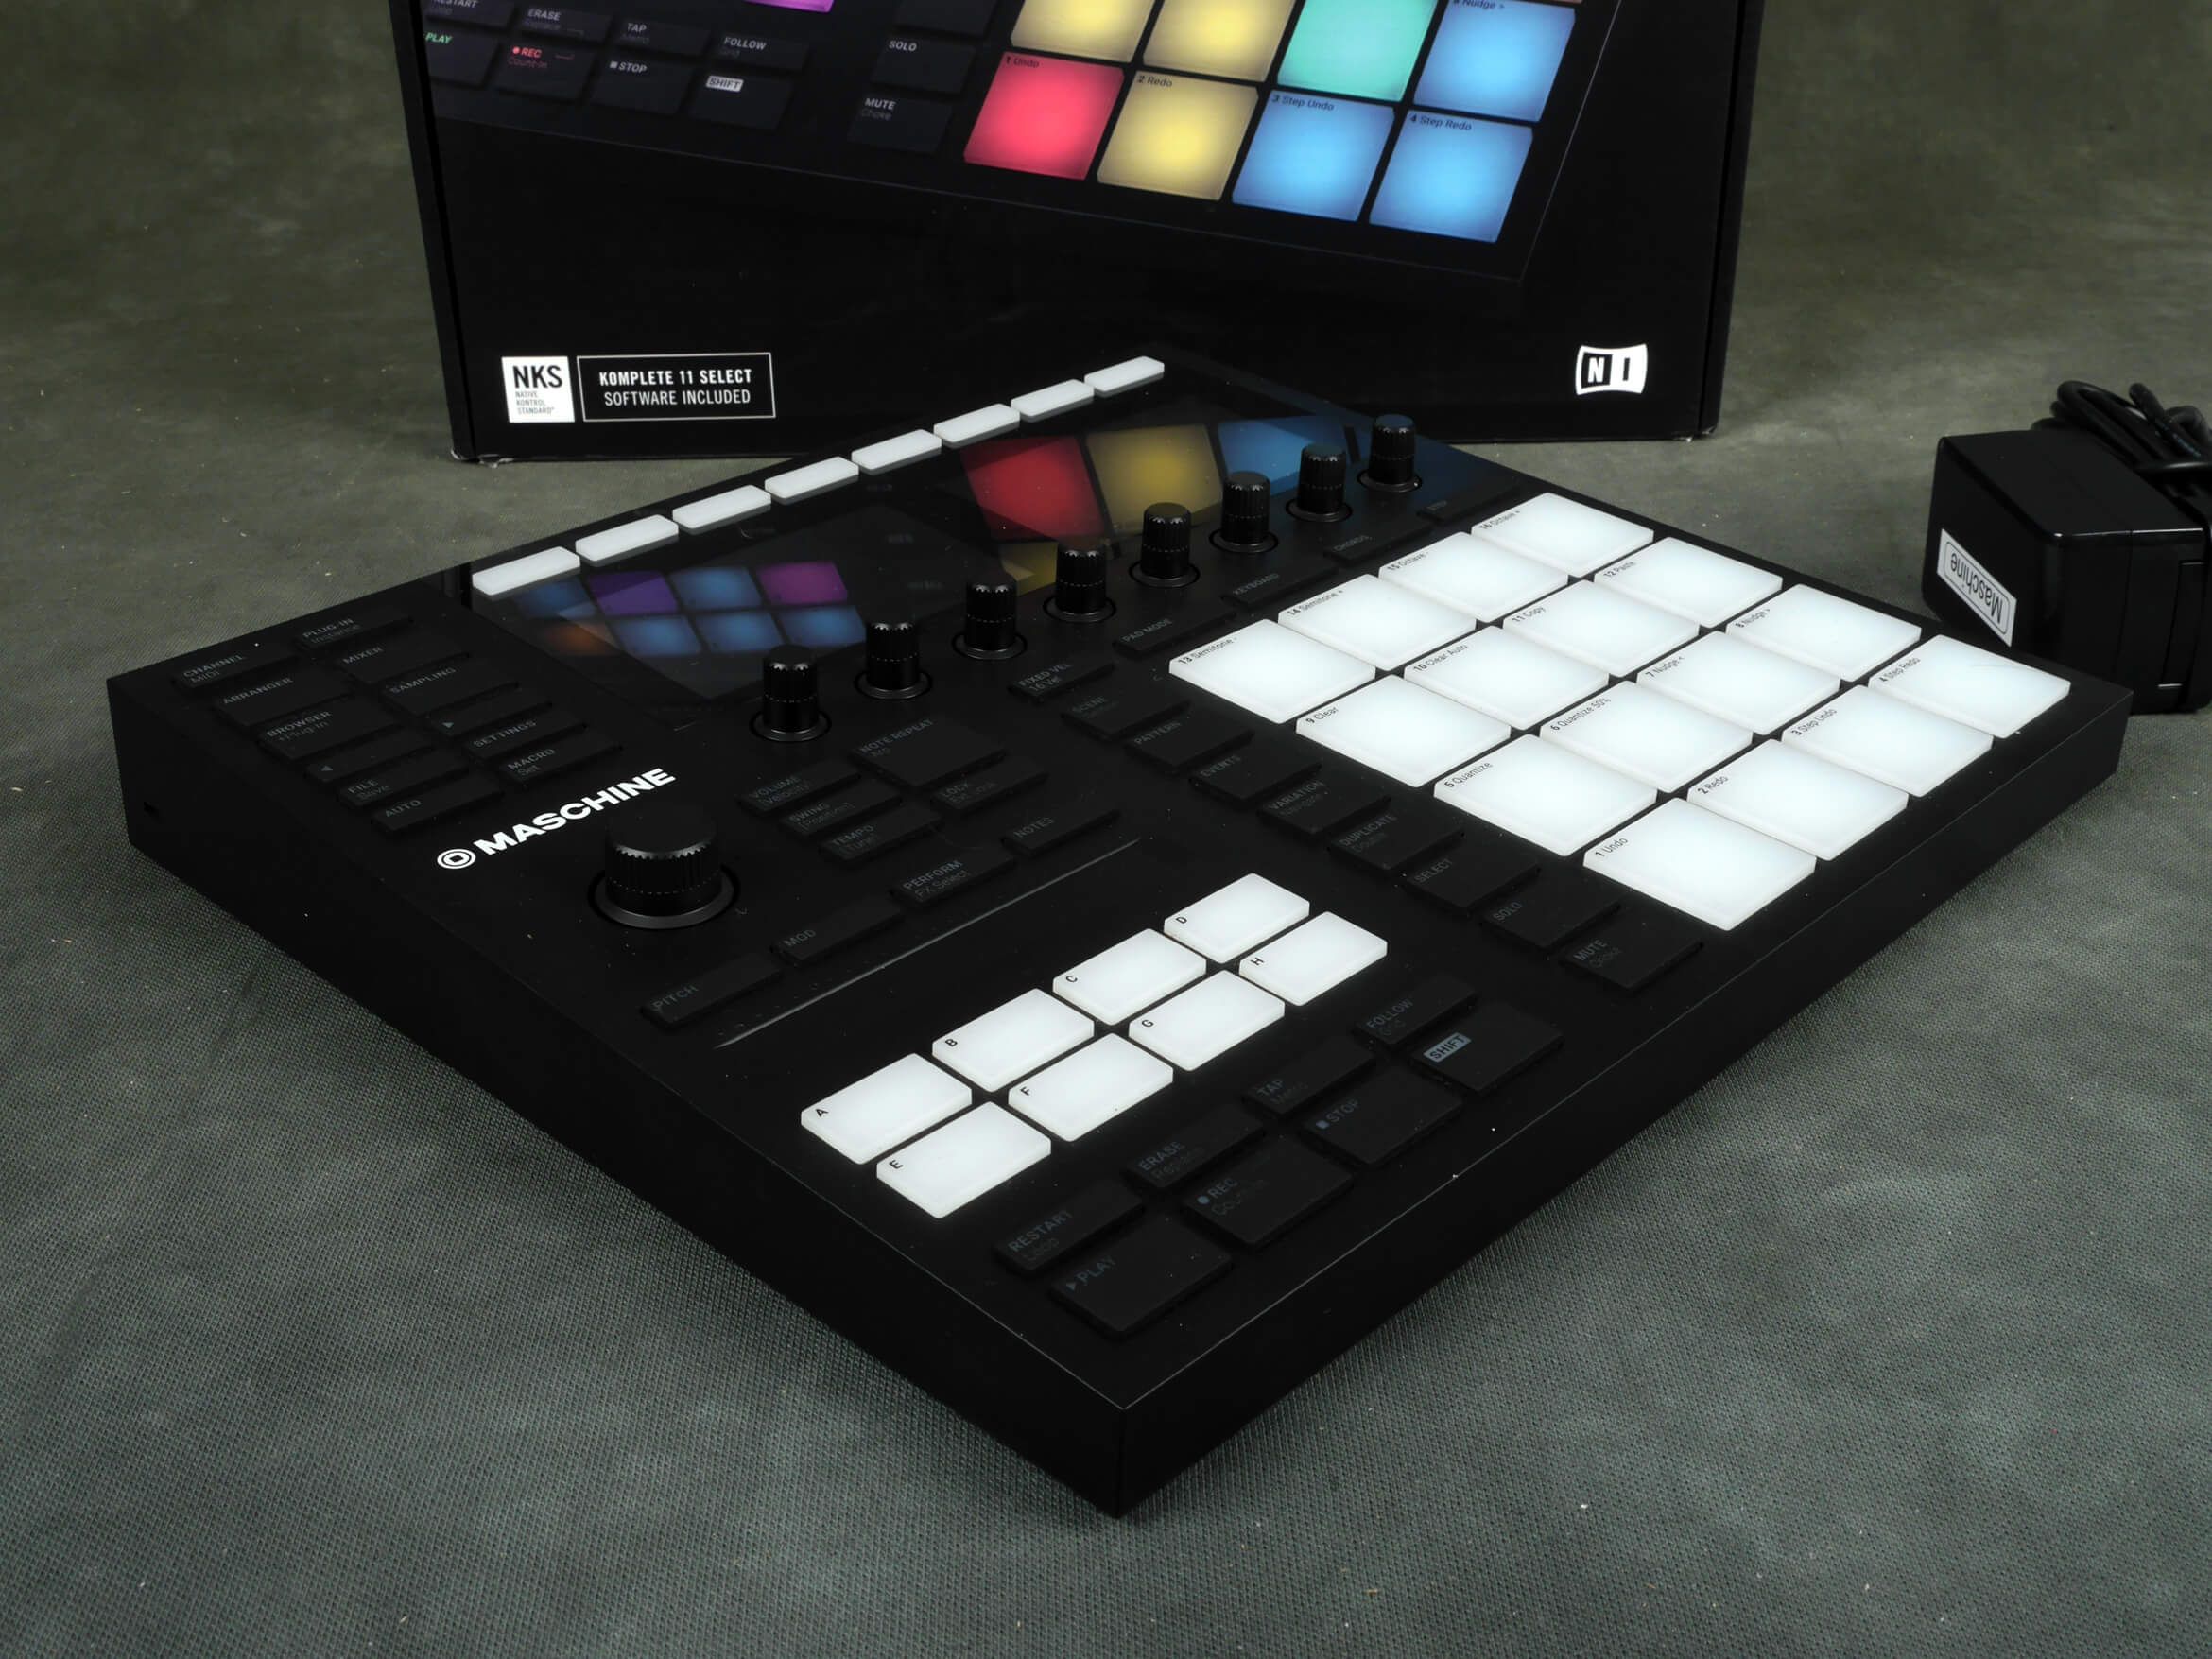 download native instruments maschine mikro mk3 production drum machine controller work with cdjs